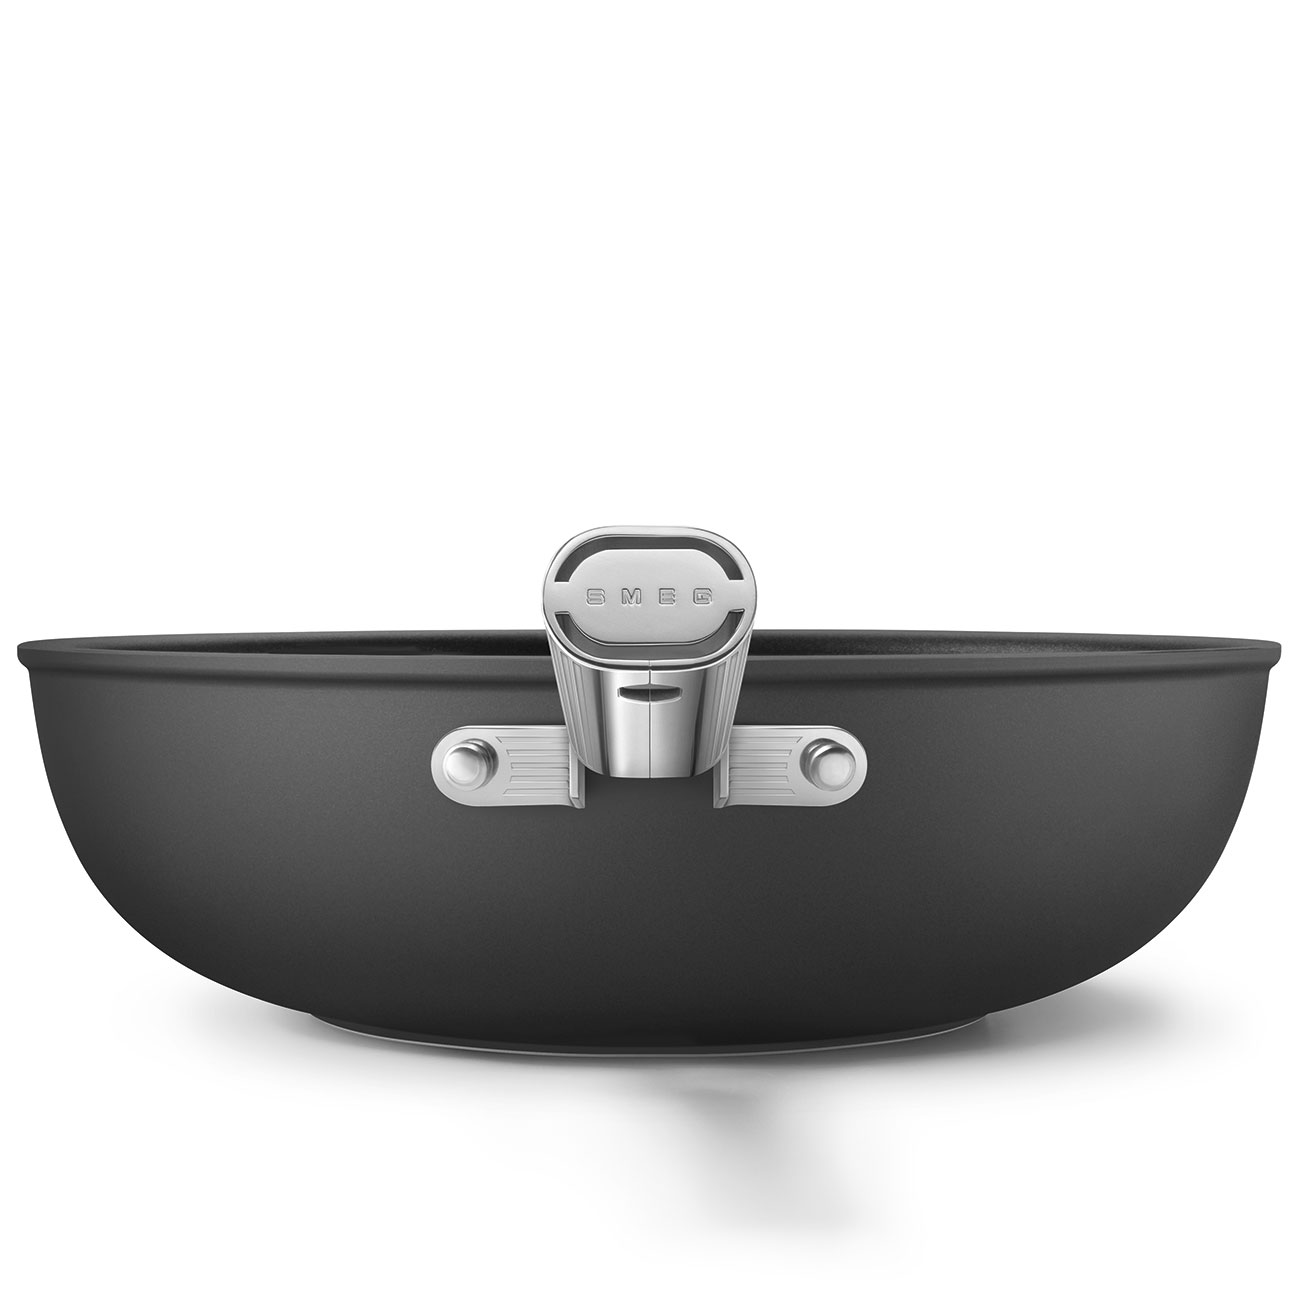 Smeg Black Non-stick Wok with Stainless Steel Handle - CKFW3001BLM_5